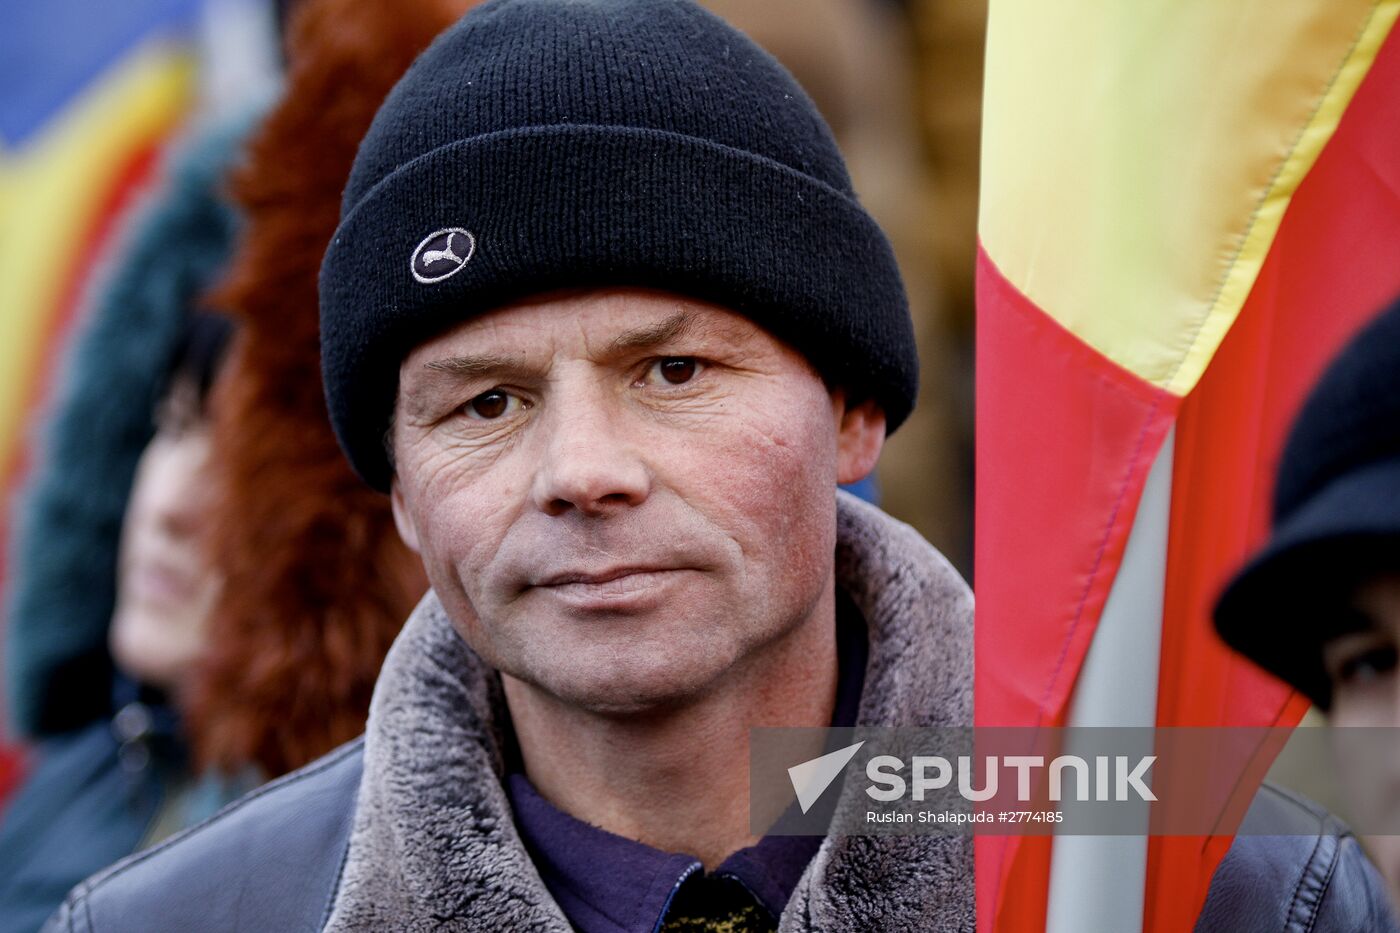 Protest rally in Chisinau demanding early parliamentary election